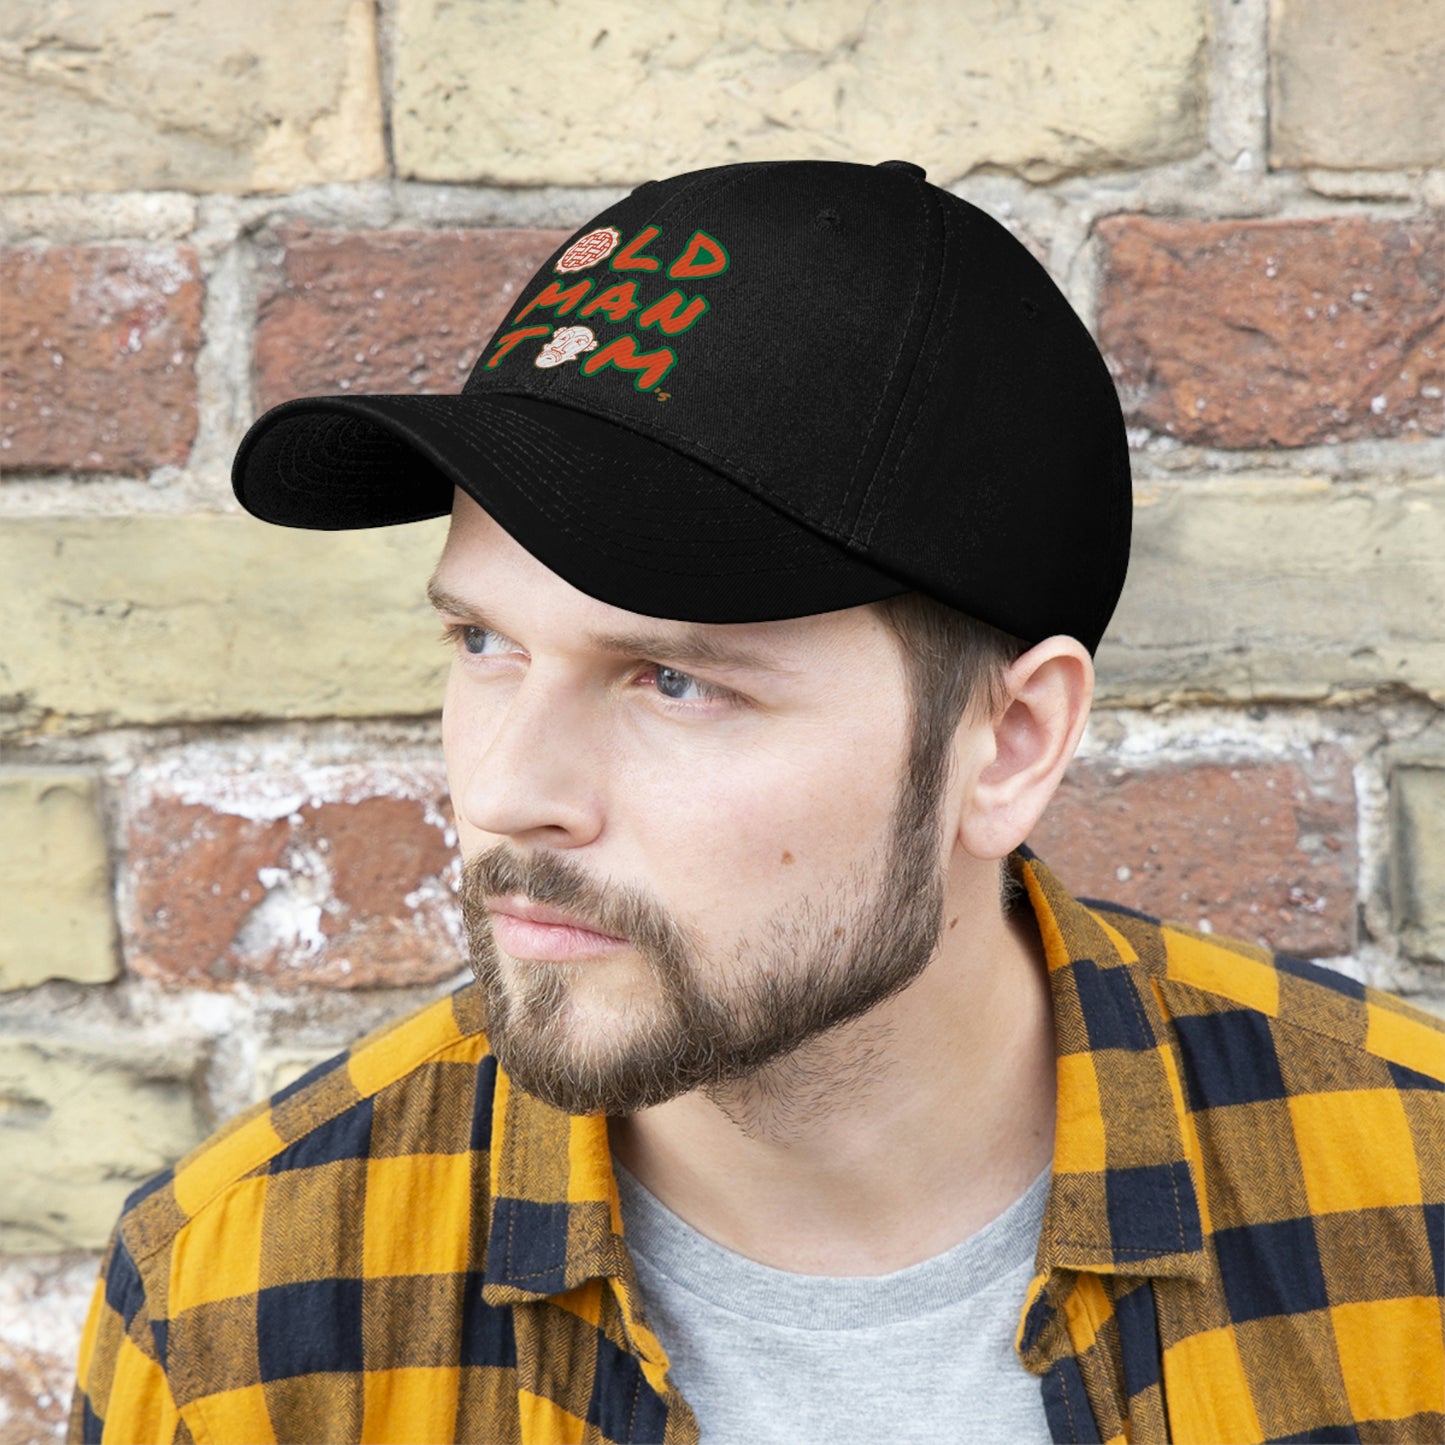 Old Man Tom's "I Can Read It" Unisex Twill Hat